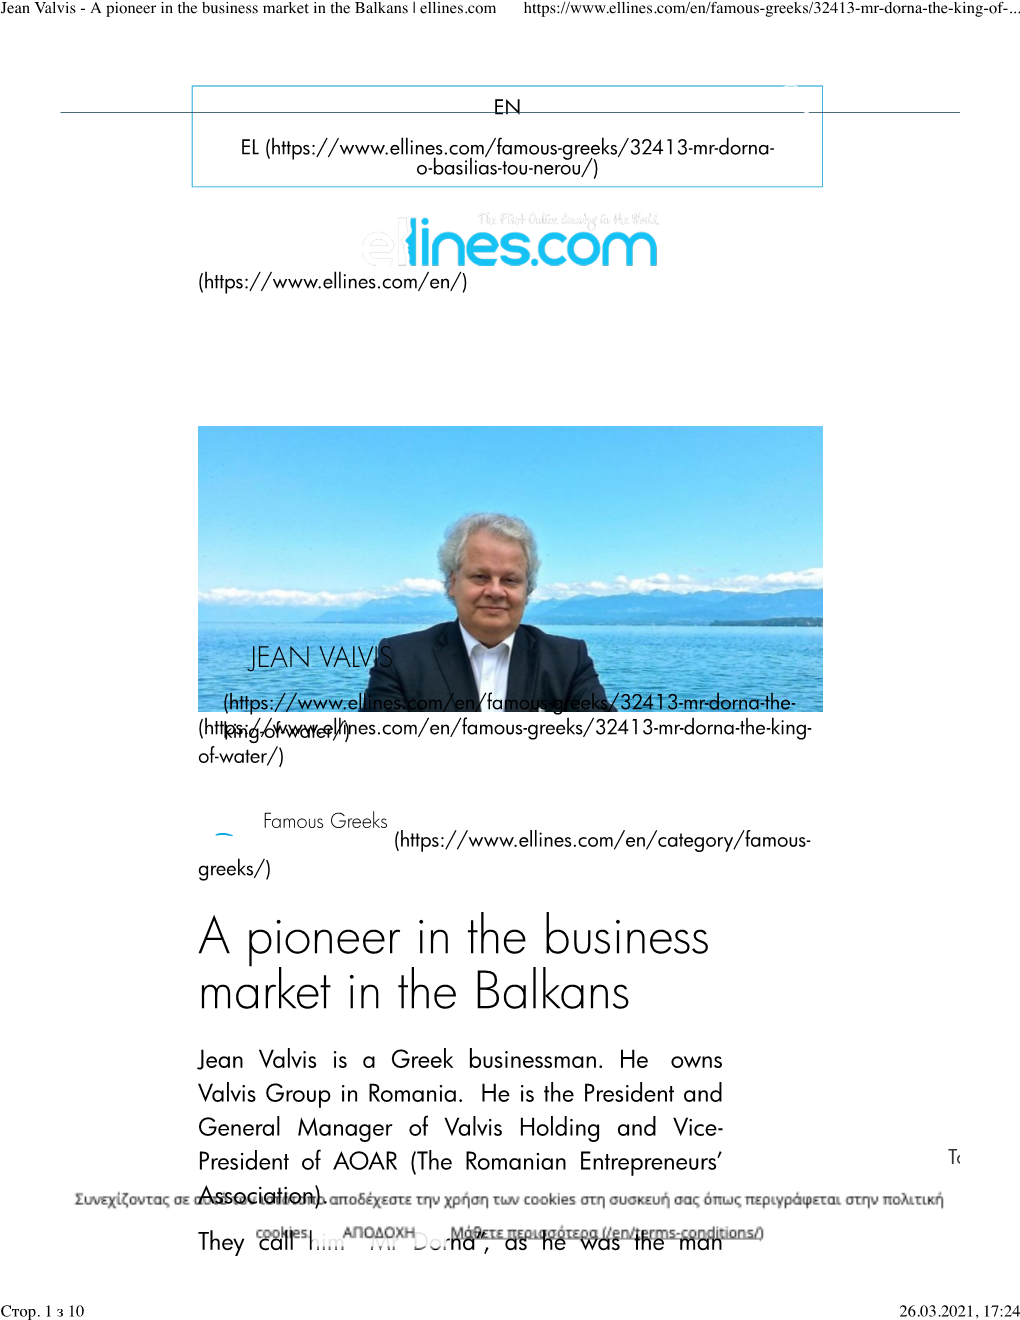 Jean Valvis - a Pioneer in the Business Market in the Balkans | Ellines.Com